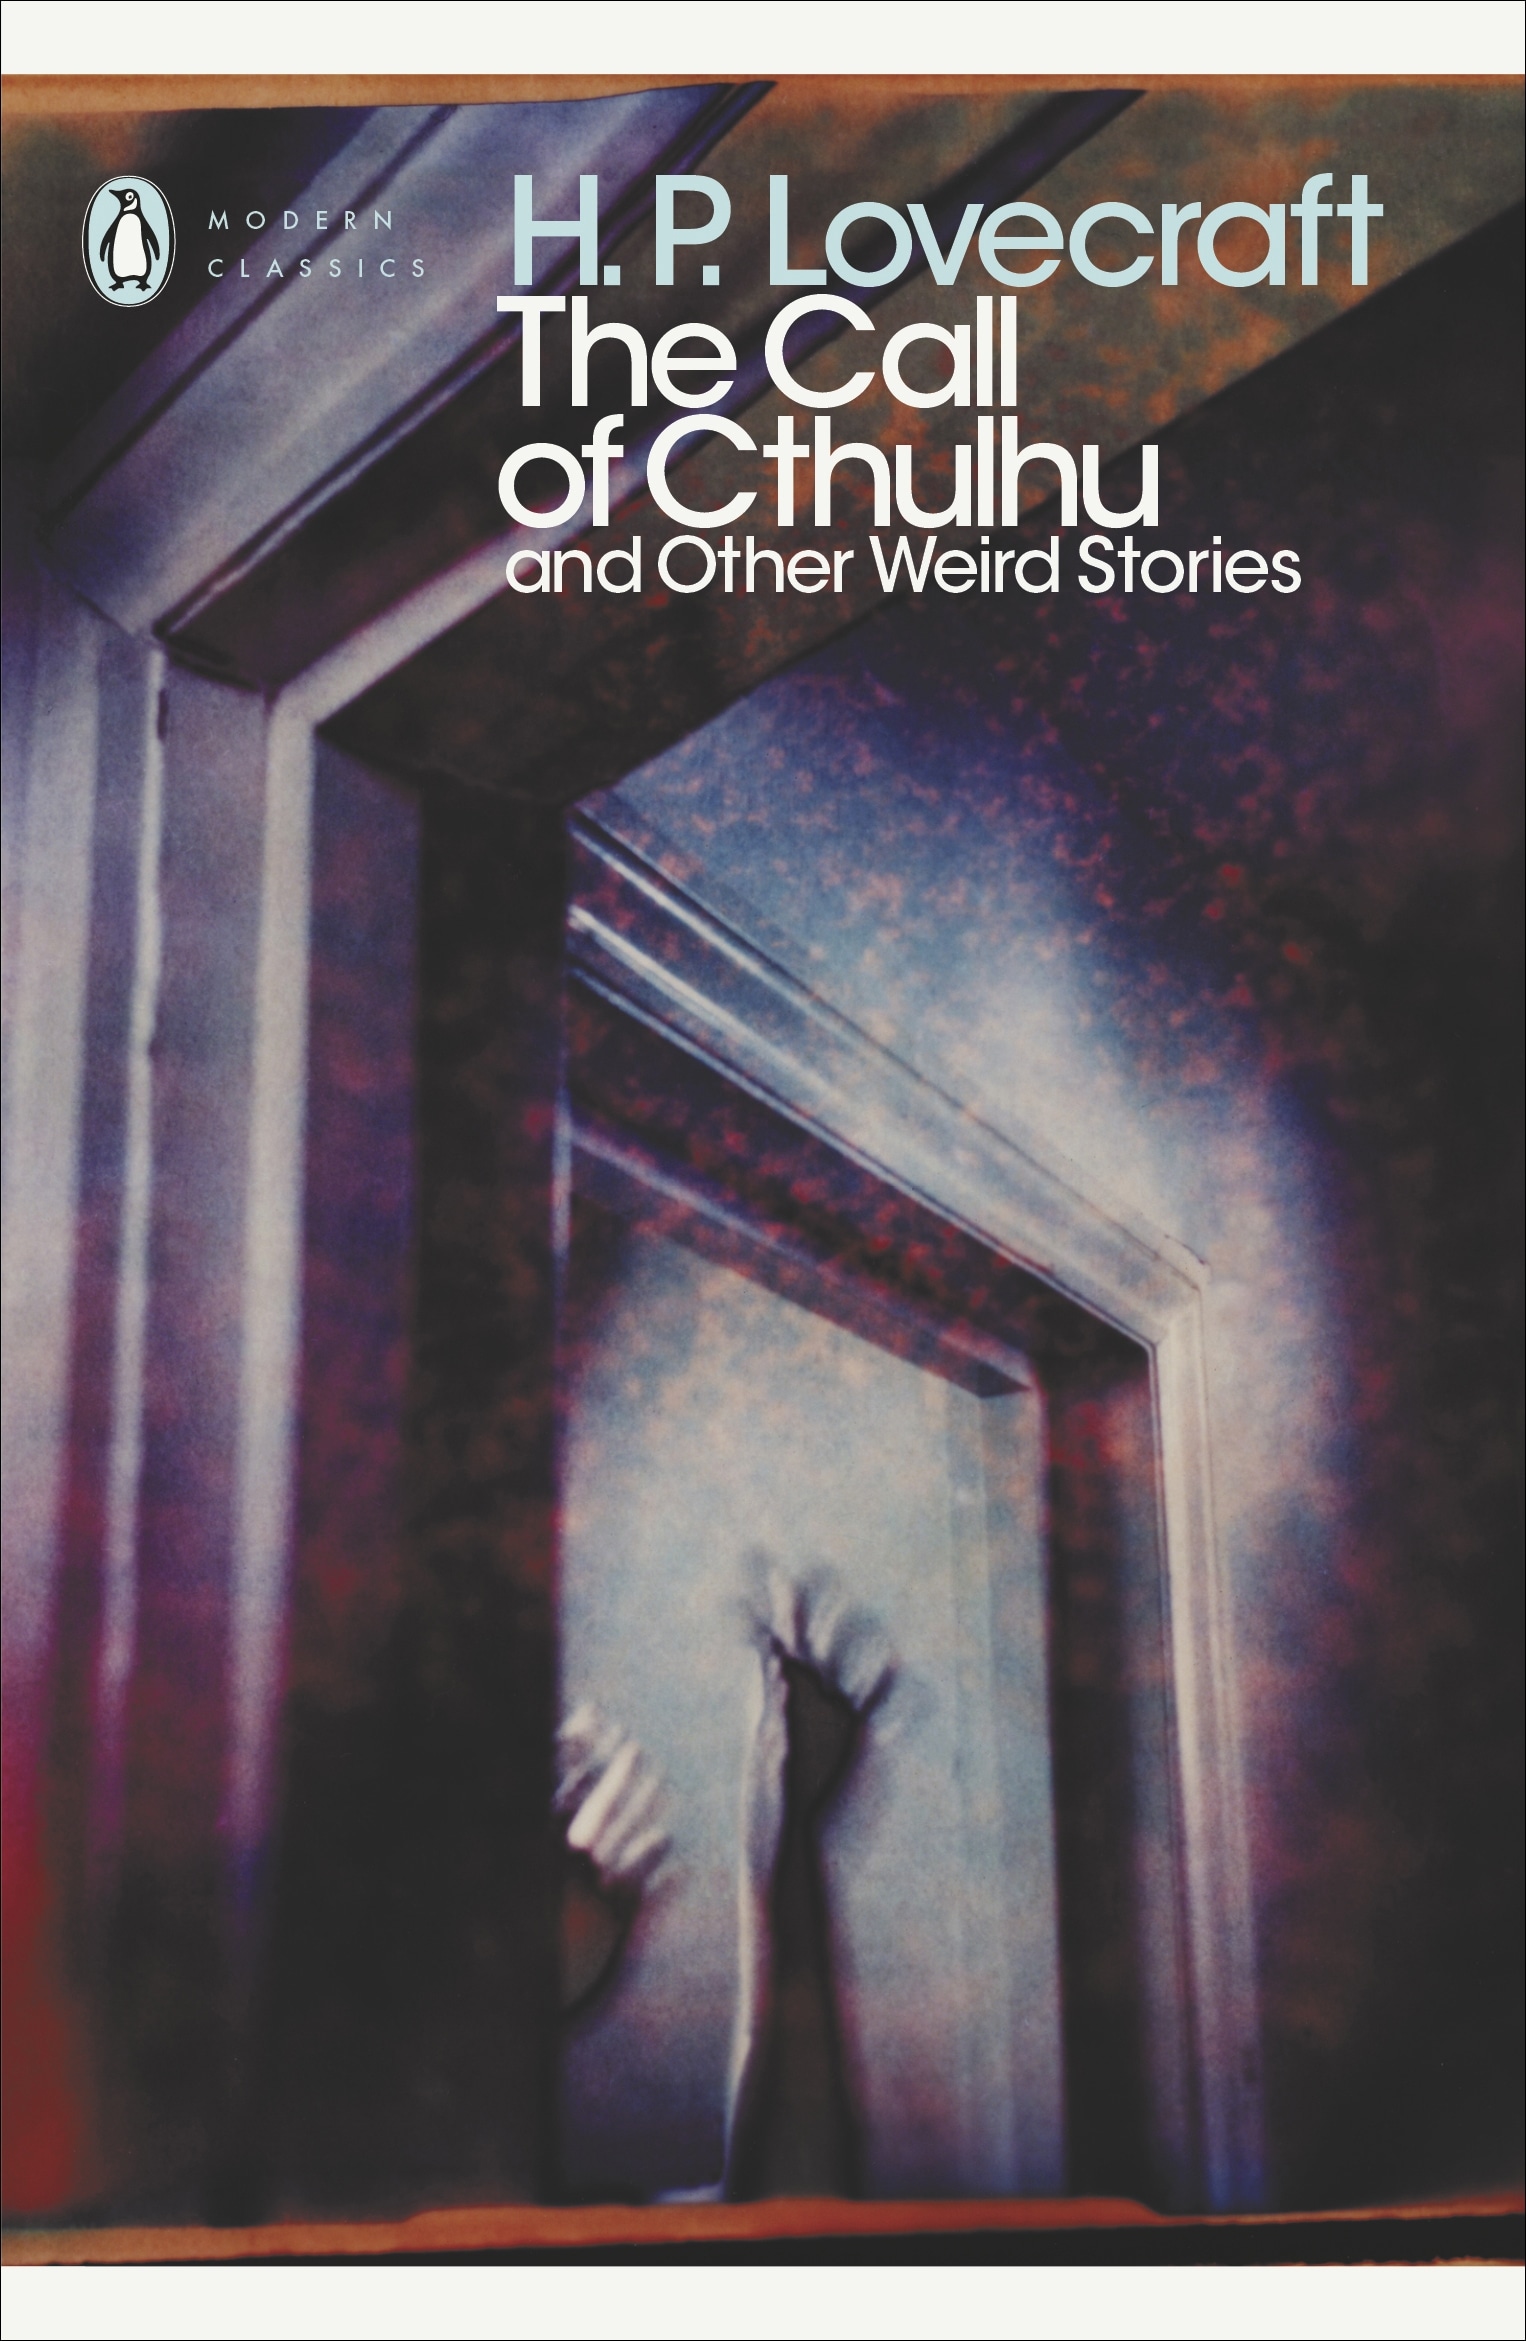 Book “The Call of Cthulhu and Other Weird Stories” by H. P. Lovecraft, S T Joshi — July 25, 2002